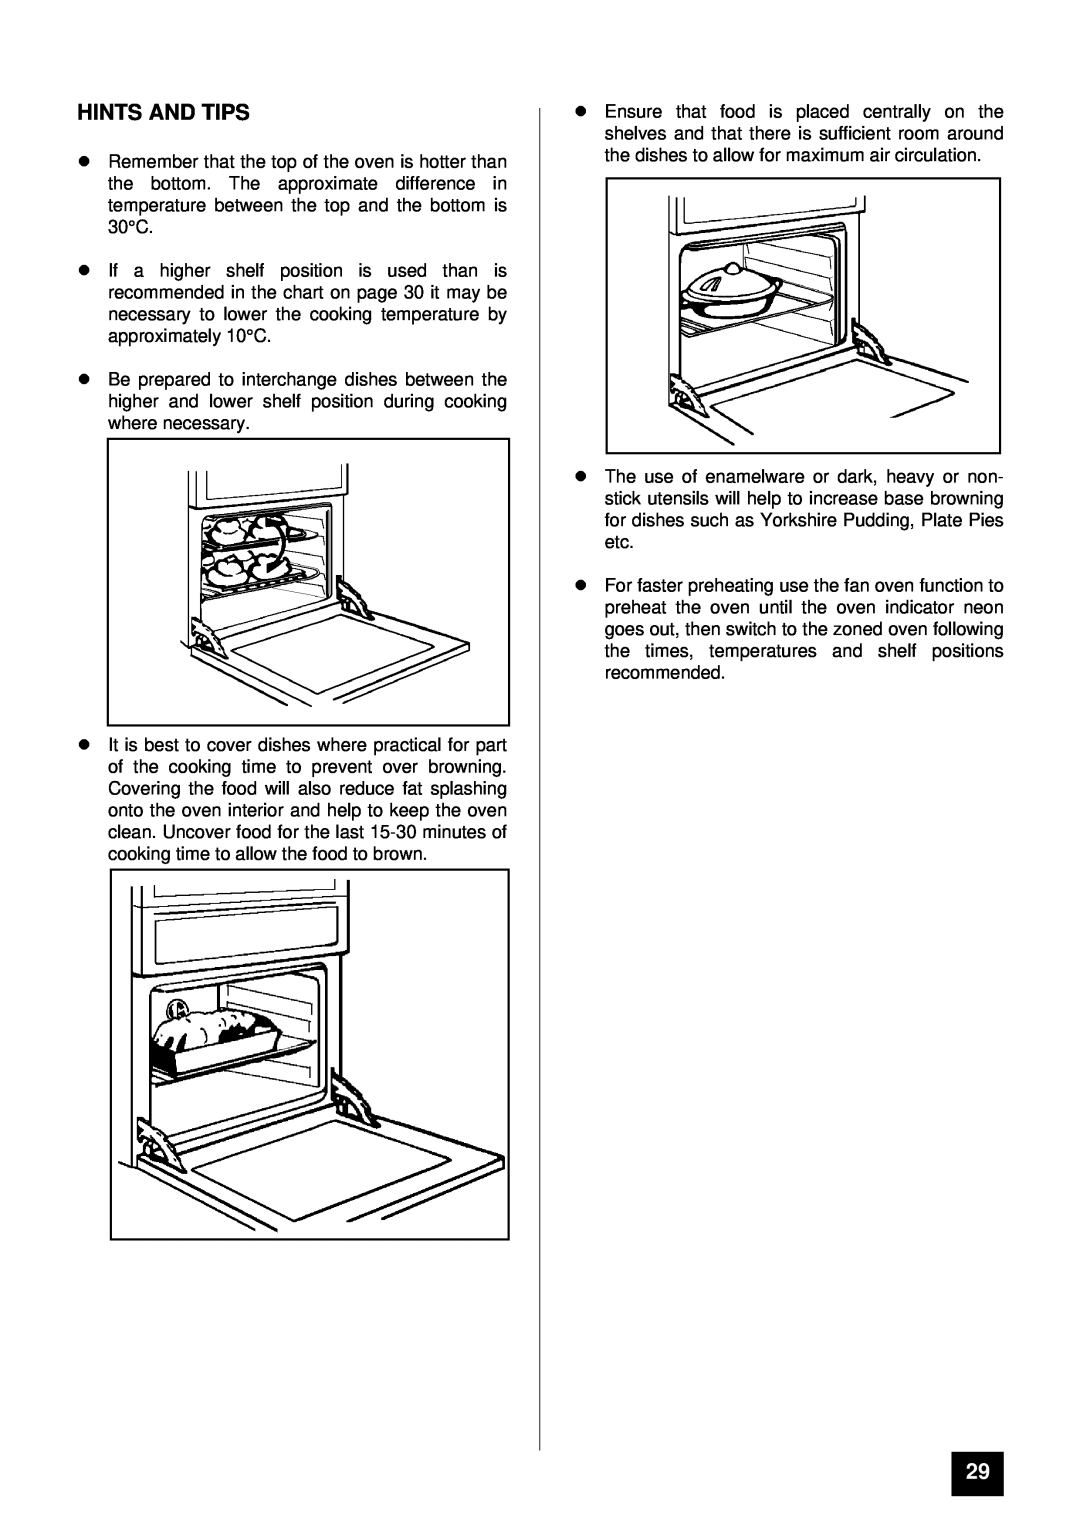 Tricity Bendix BD 921 installation instructions Hints And Tips 